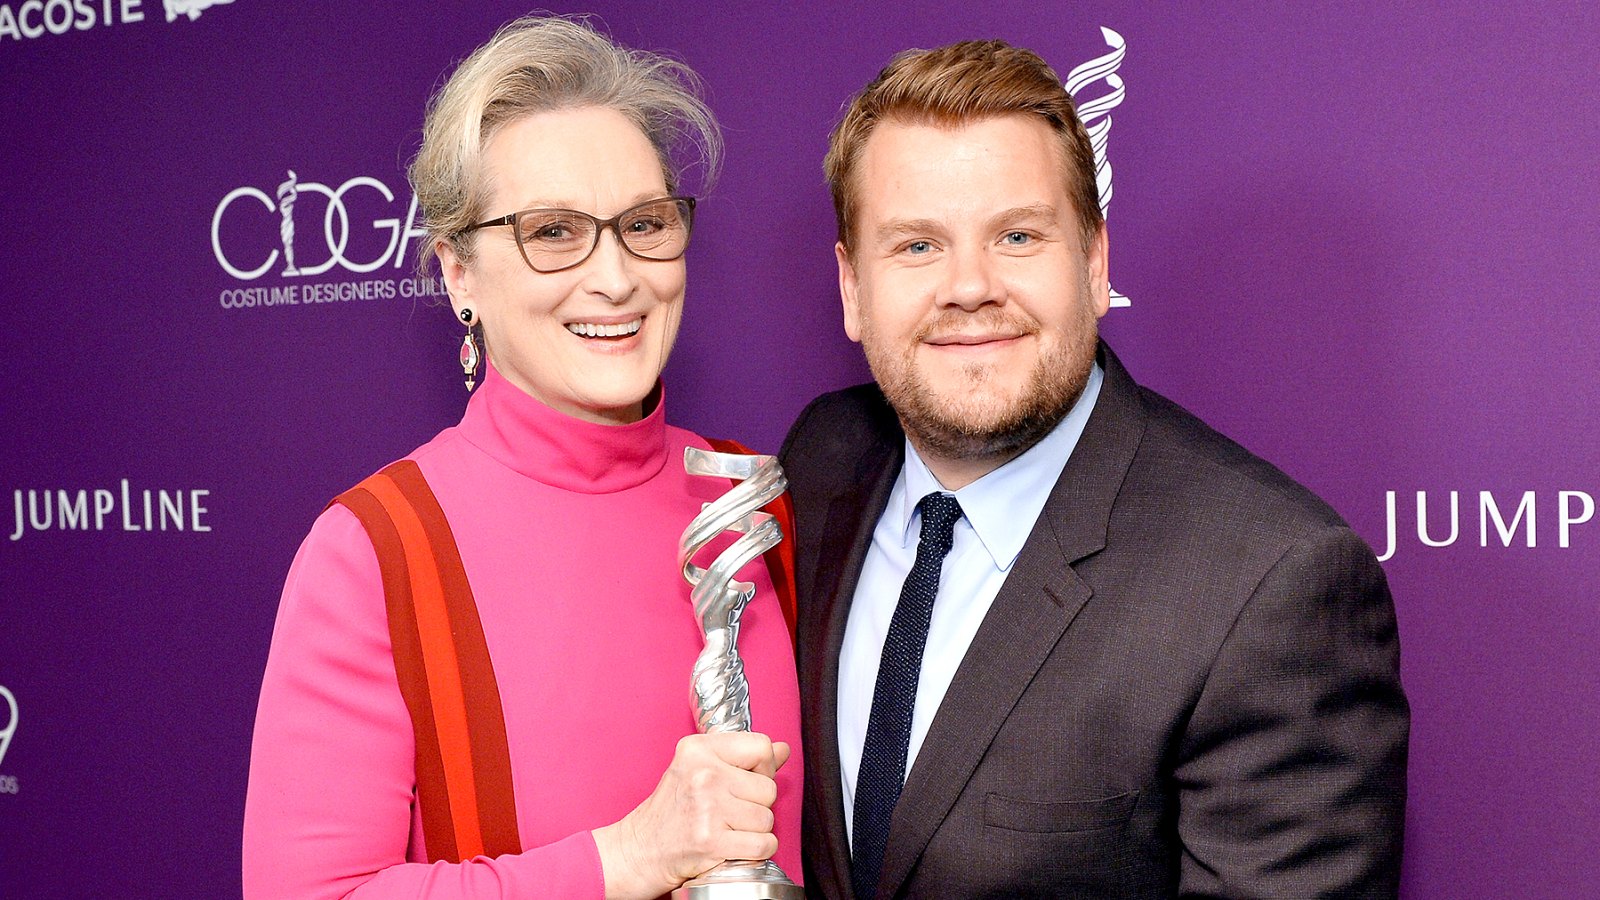 Meryl Streep, recipient of the Distinguished Collaborator Award, and TV personality James Corden attend The 19th CDGA (Costume Designers Guild Awards) with Presenting Sponsor LACOSTE at The Beverly Hilton Hotel on February 21, 2017 in Beverly Hills, California.